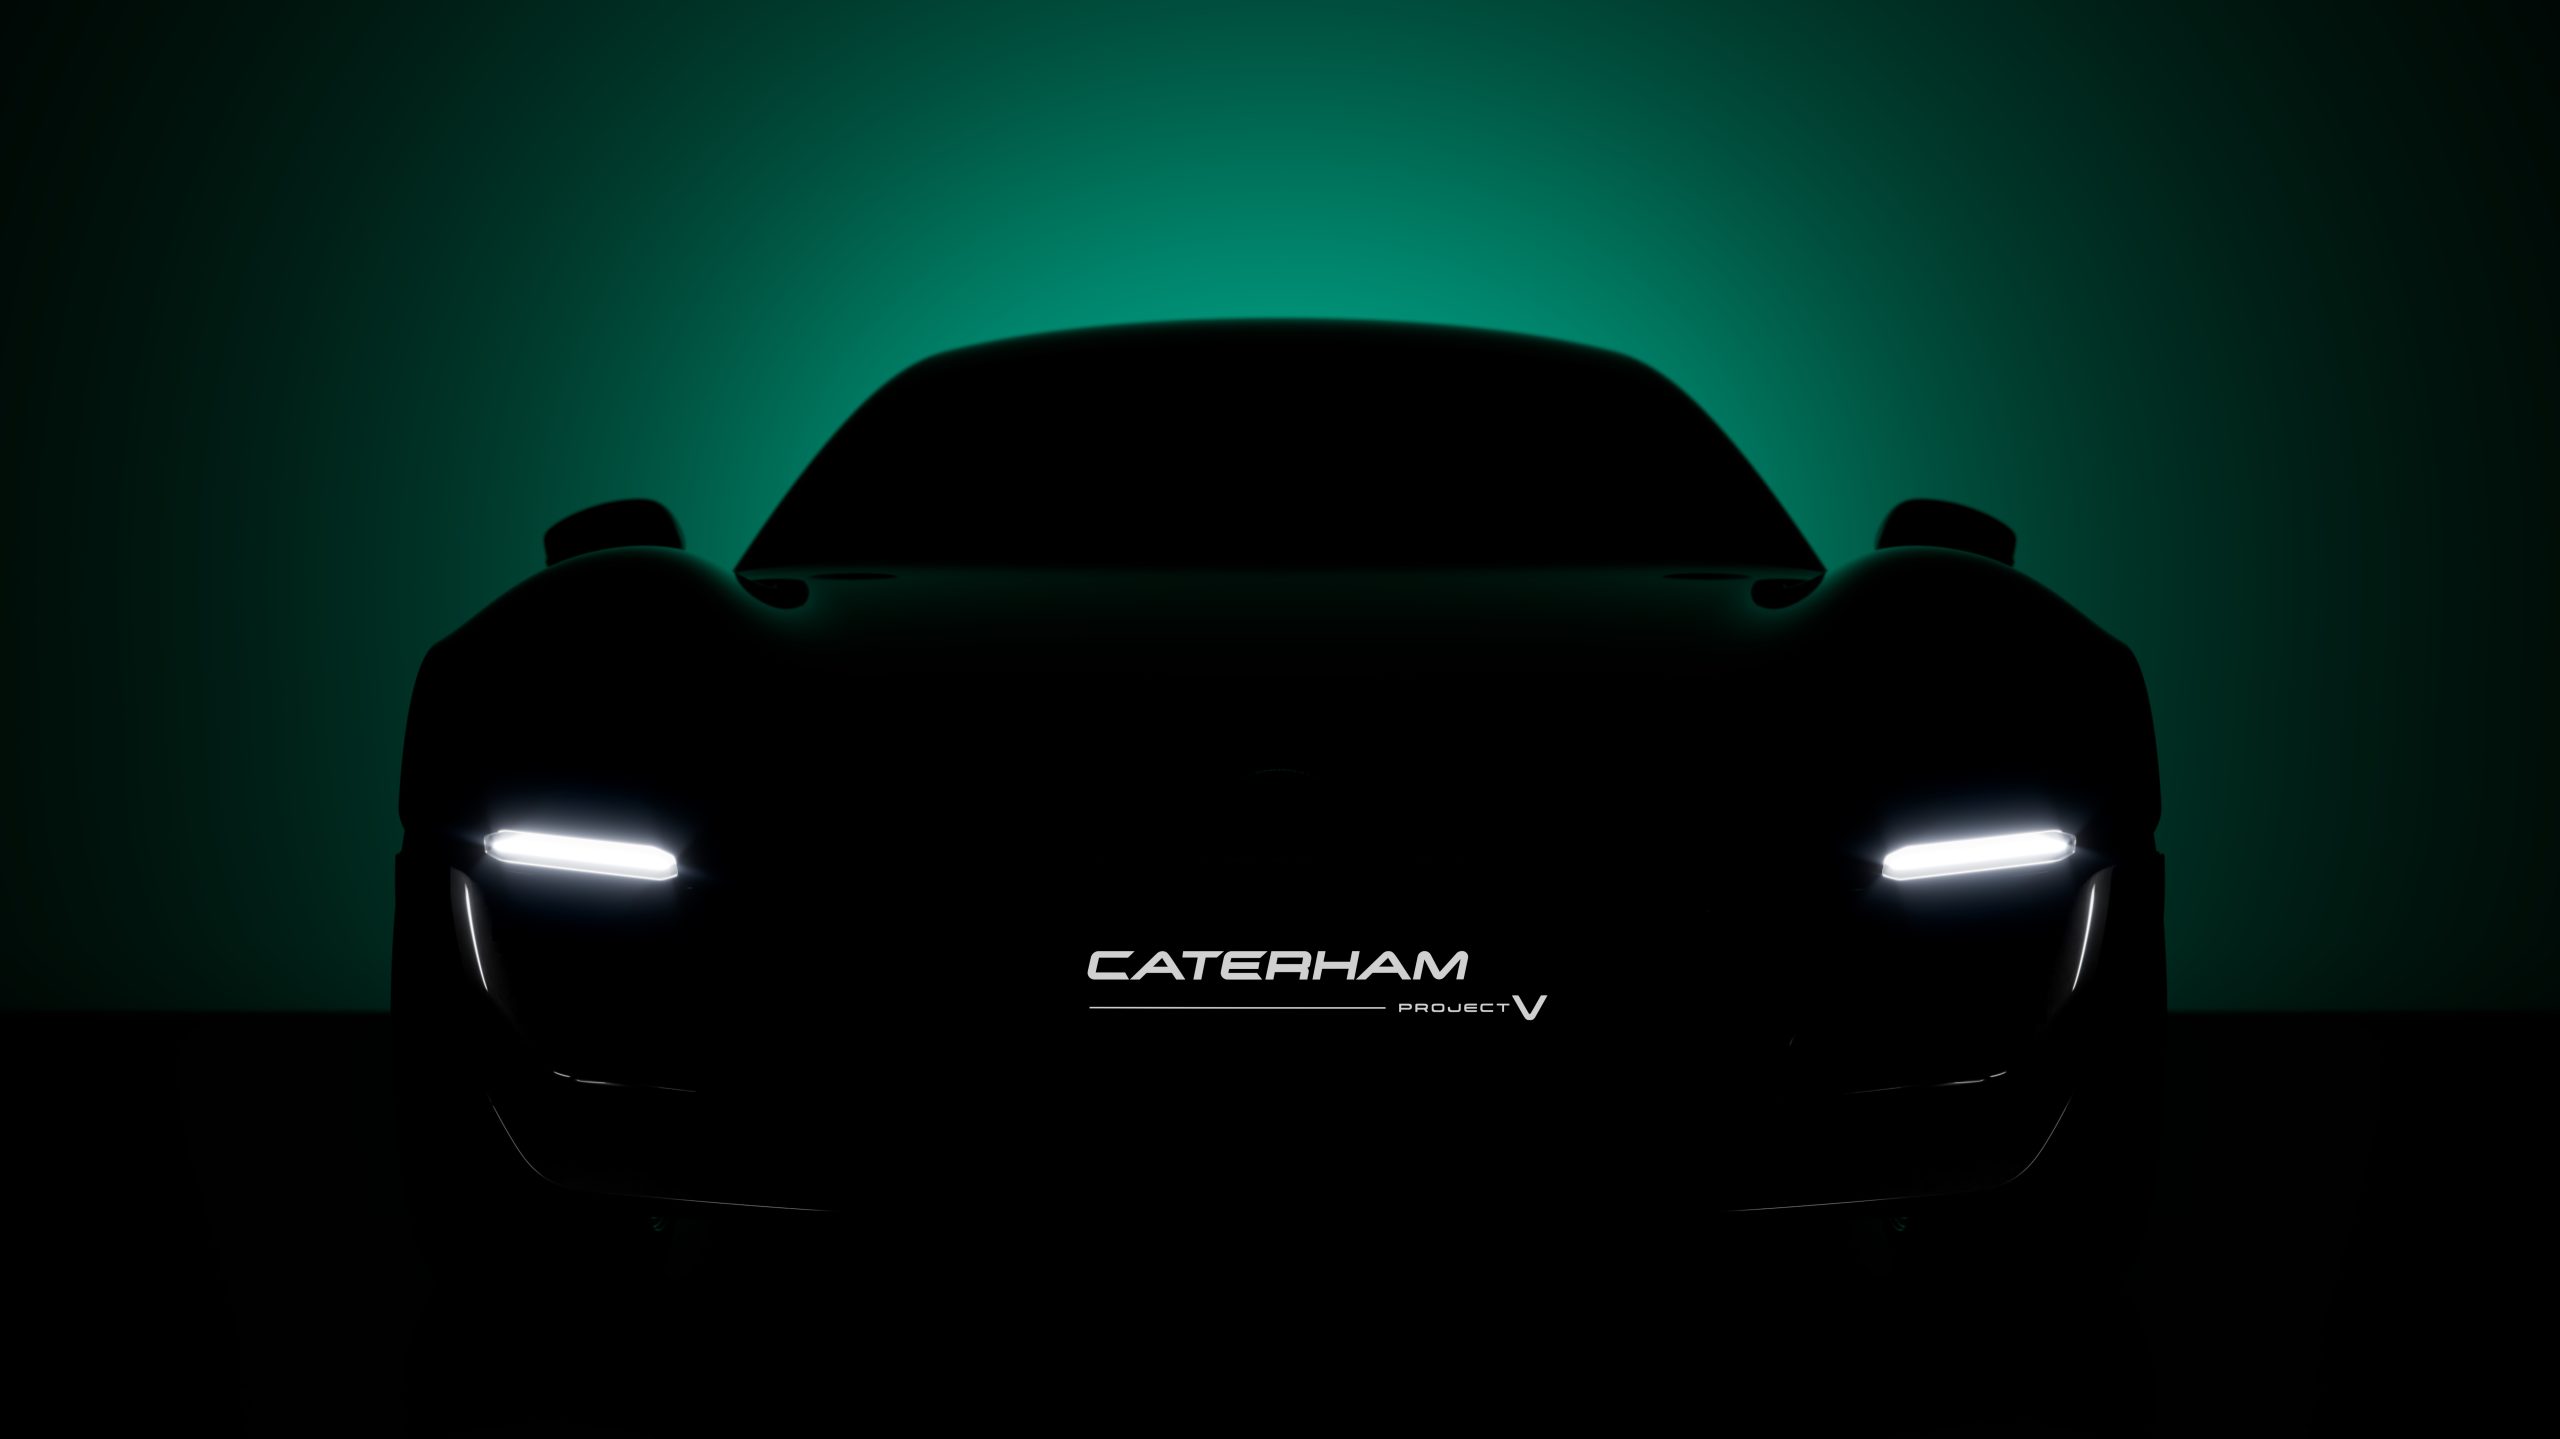 Caterham’s electric future arrives in July